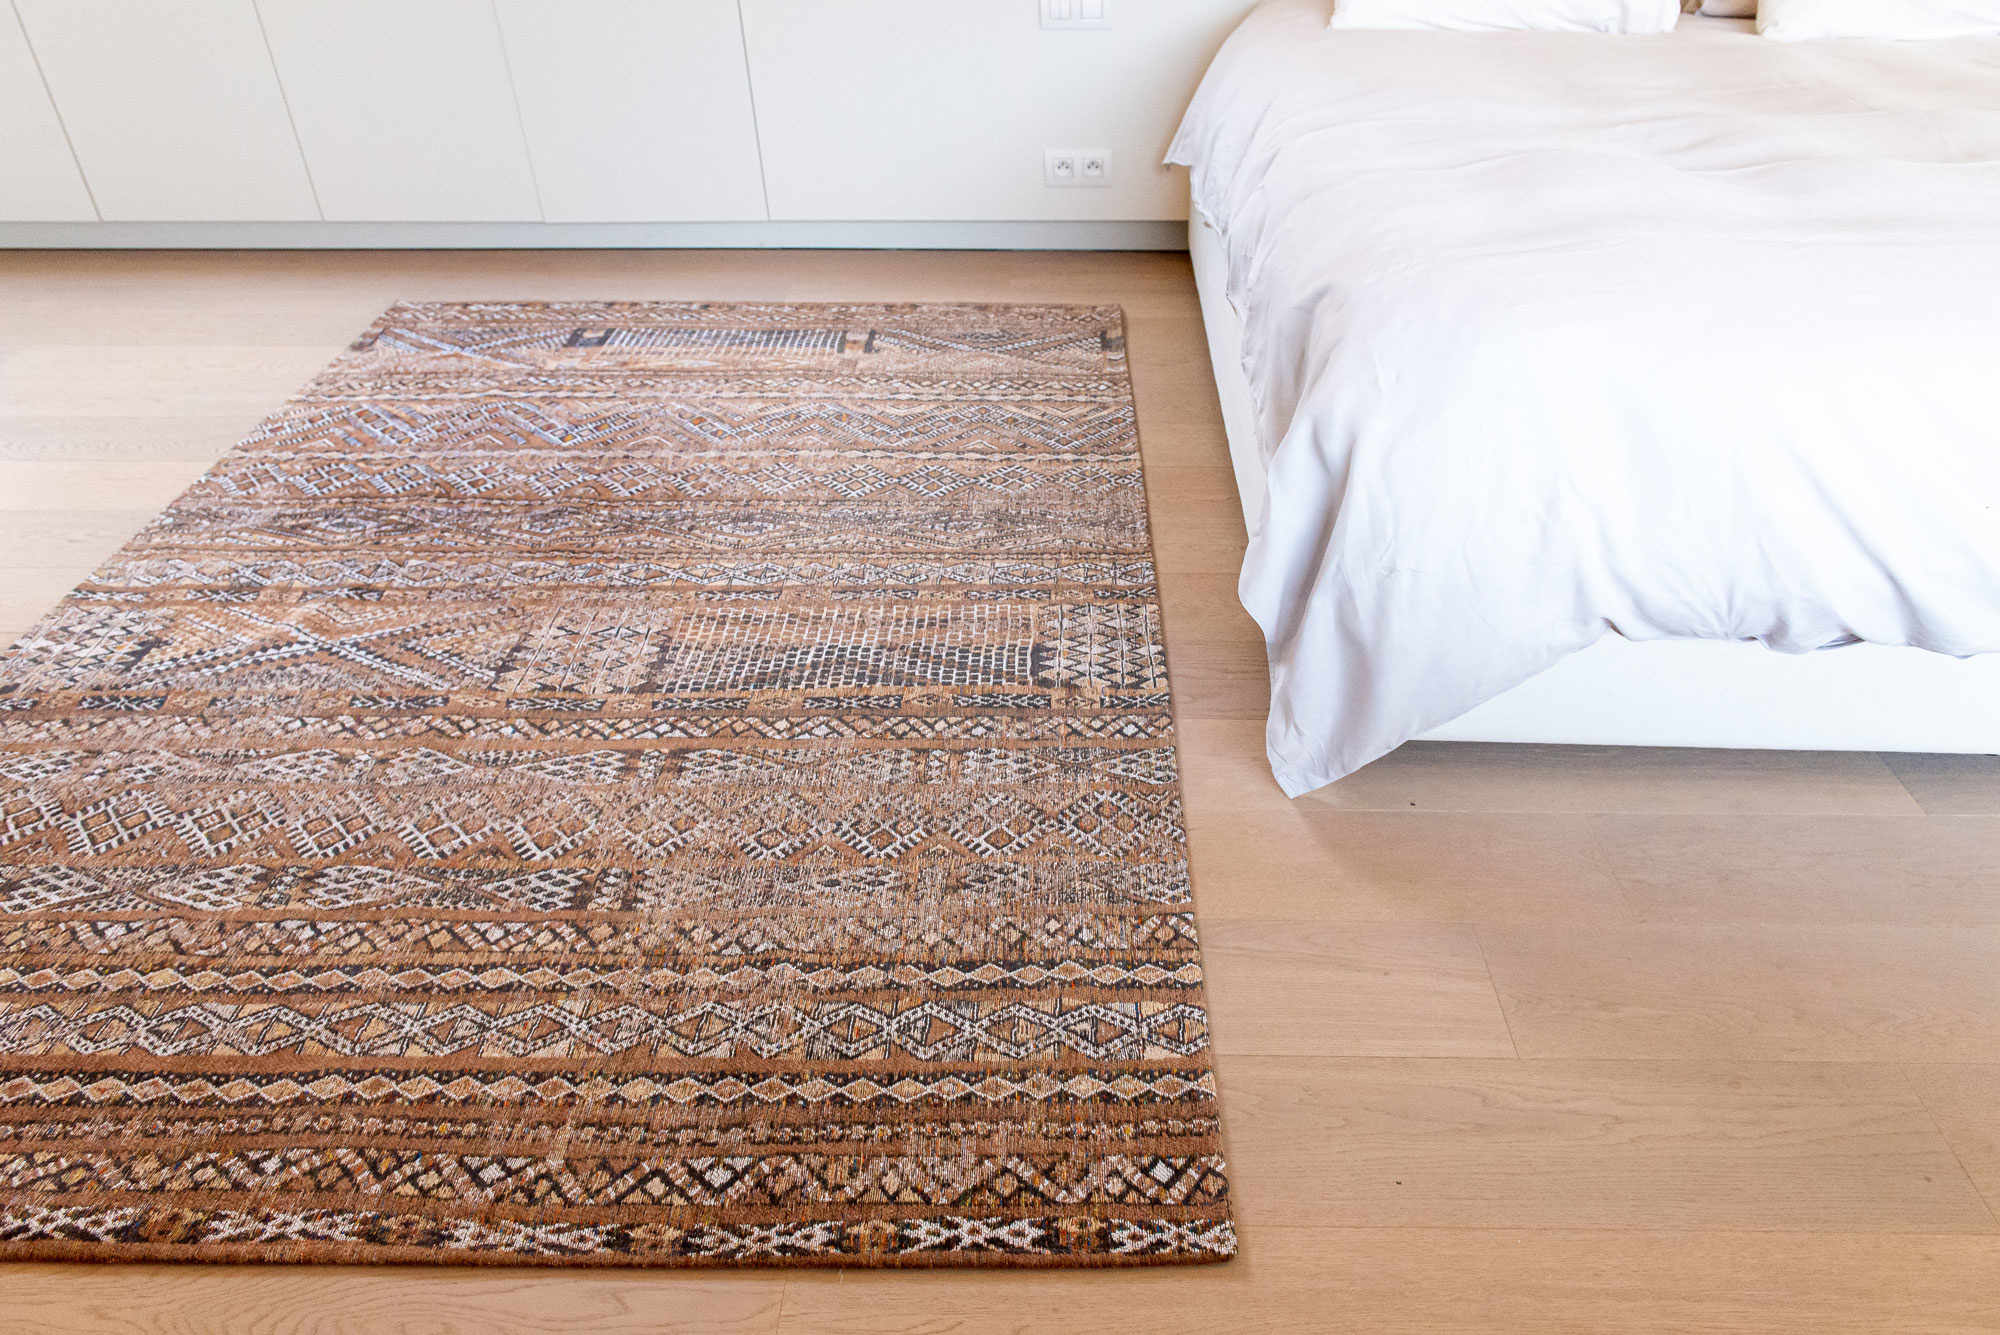 Antiquarian Flatwoven Brown Rug ☞ Size: 5' 7" x 8' (170 x 240 cm)